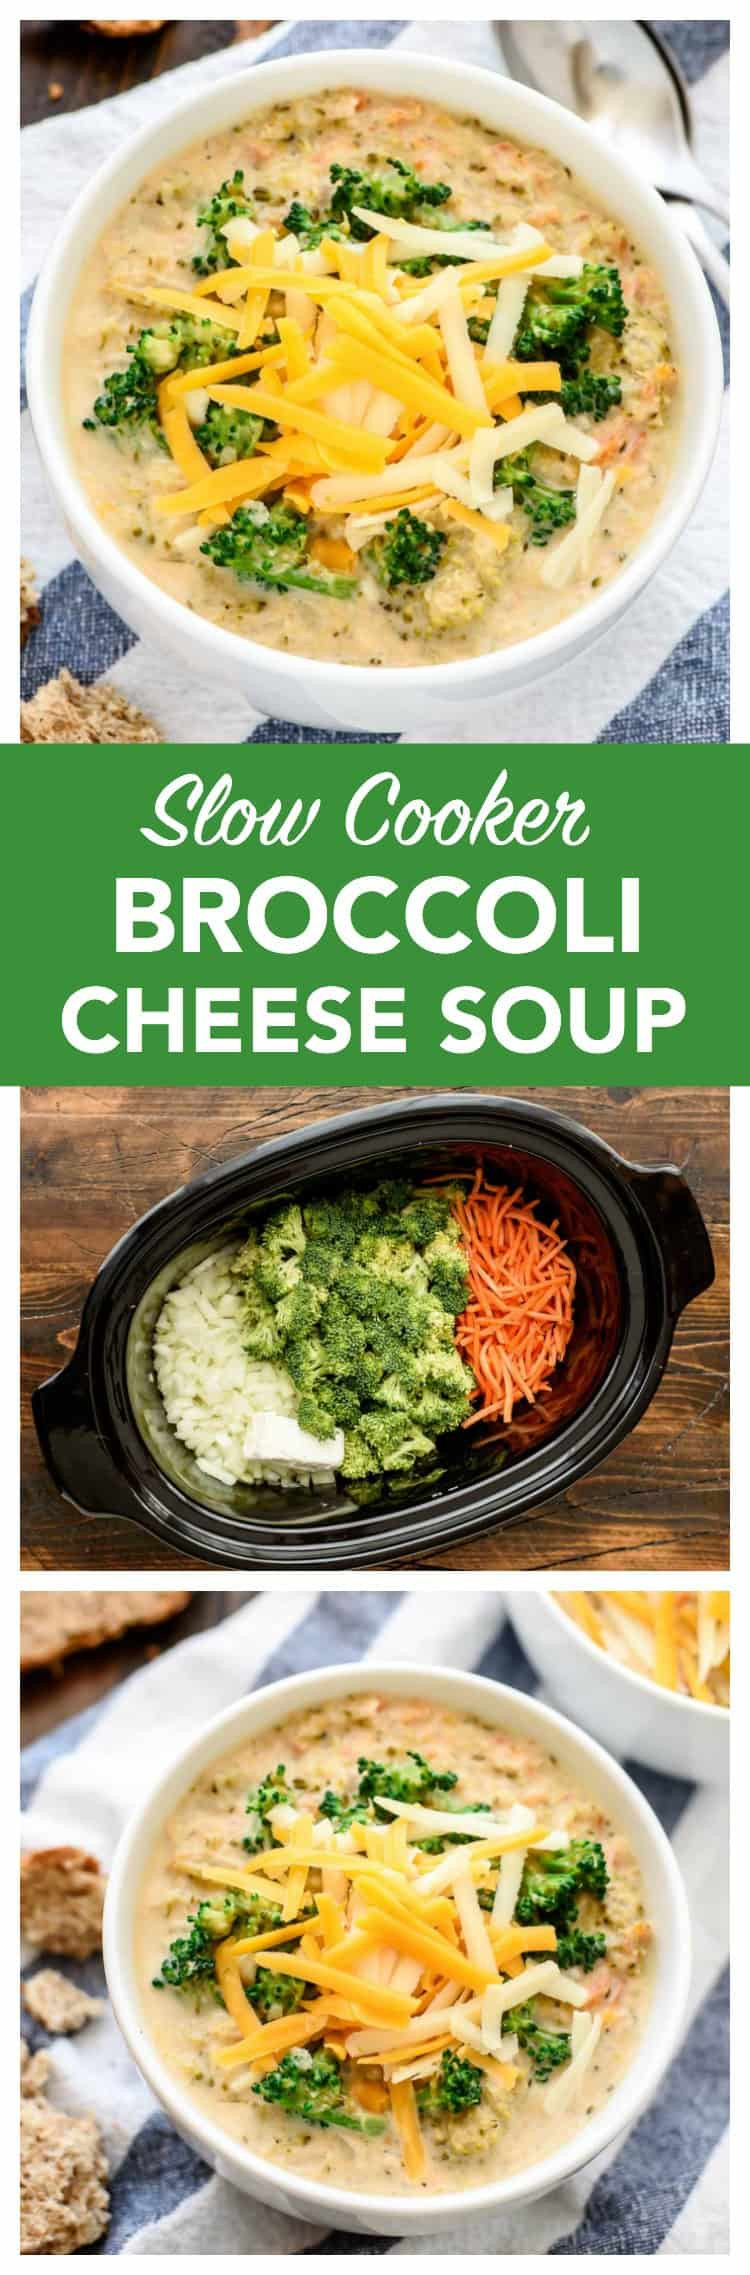 Broccoli Cheddar Soup Slow Cooker
 Slow Cooker Broccoli Cheese Soup